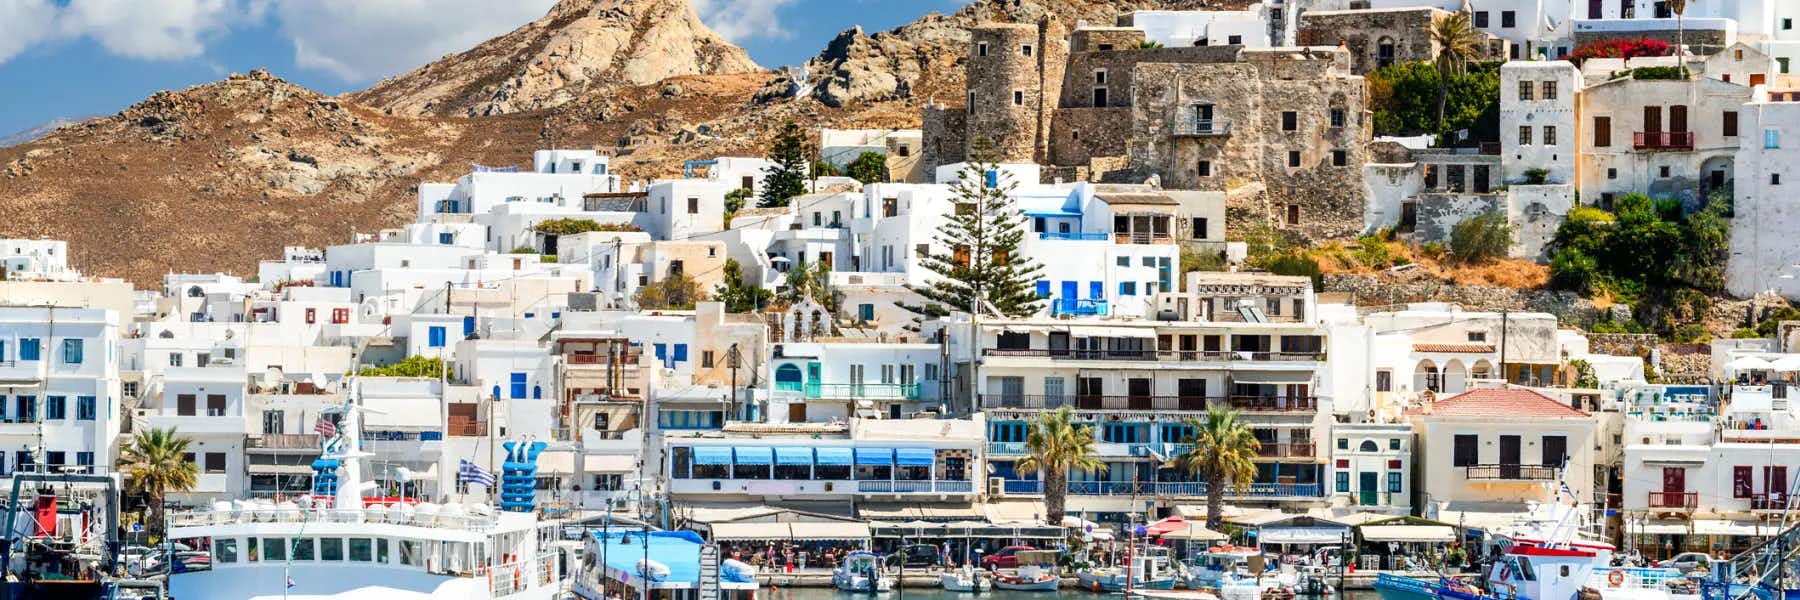 Amazing Things to Do in Naxos, Greece | When to Visit Naxos